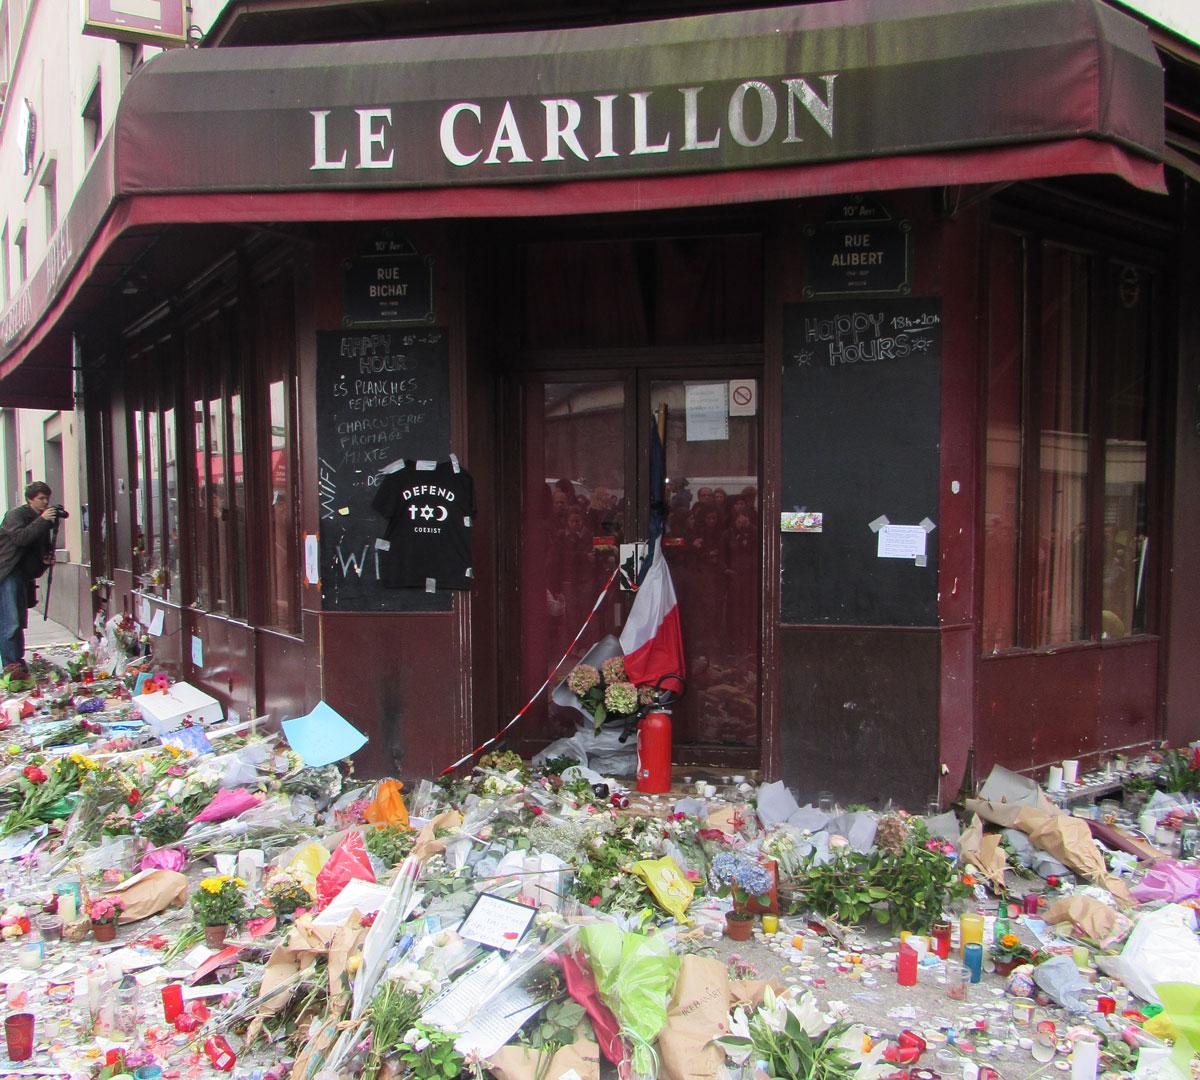 Le Carillon café on rue Alibert, which was hit during the attacks.